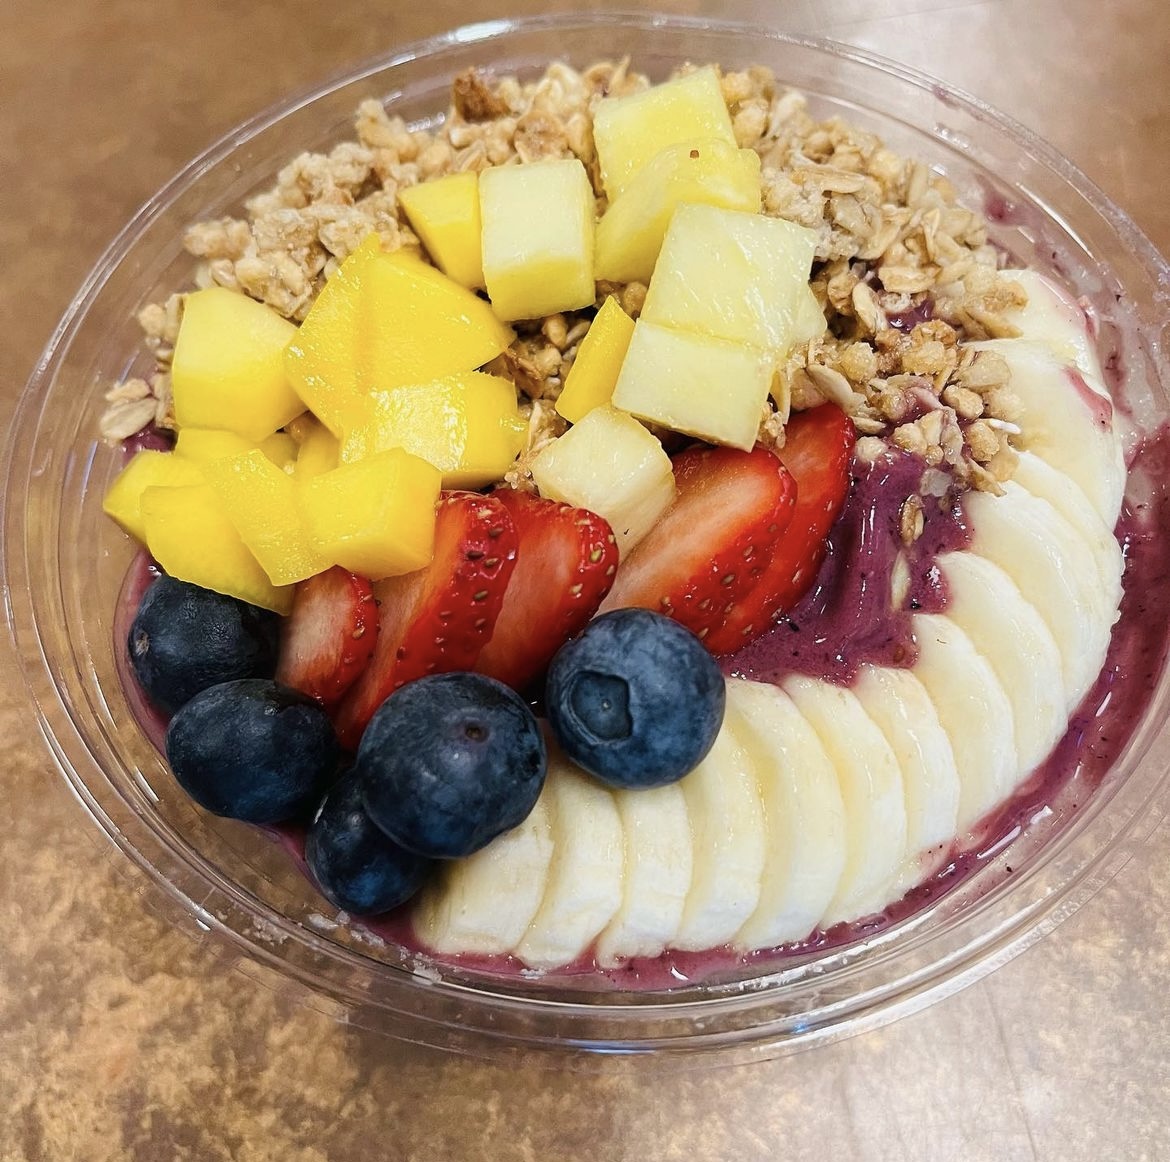 An Açaí Bowl at Uzima, which has pineapple, strawberries, blueberries, bananas, and more.